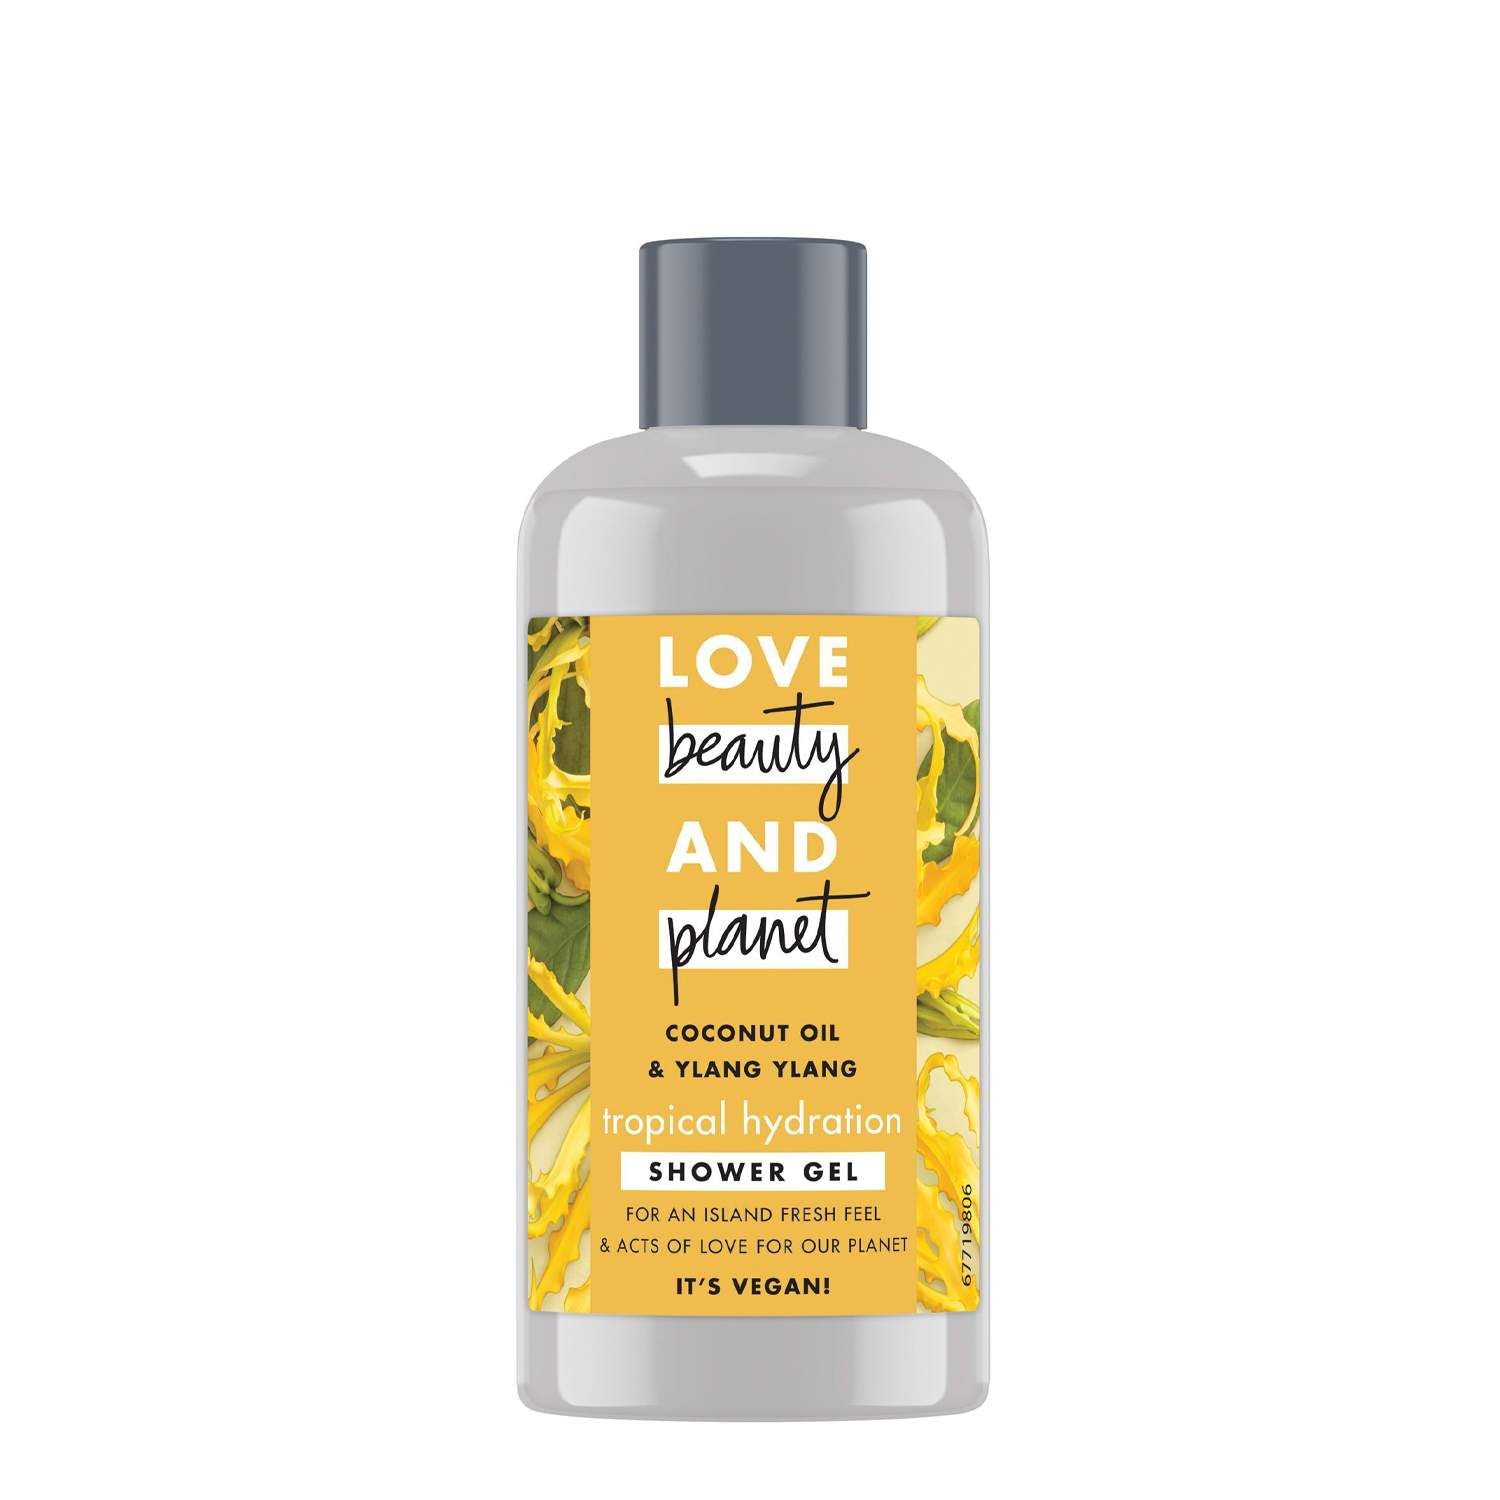 Love Beauty and Planet Tropical Hydration Coconut Oil & Ylang Ylang Shower Gel Love Beauty and Planet Tropical Hydration Coconut Oil & Ylang Ylang Shower Gel 1